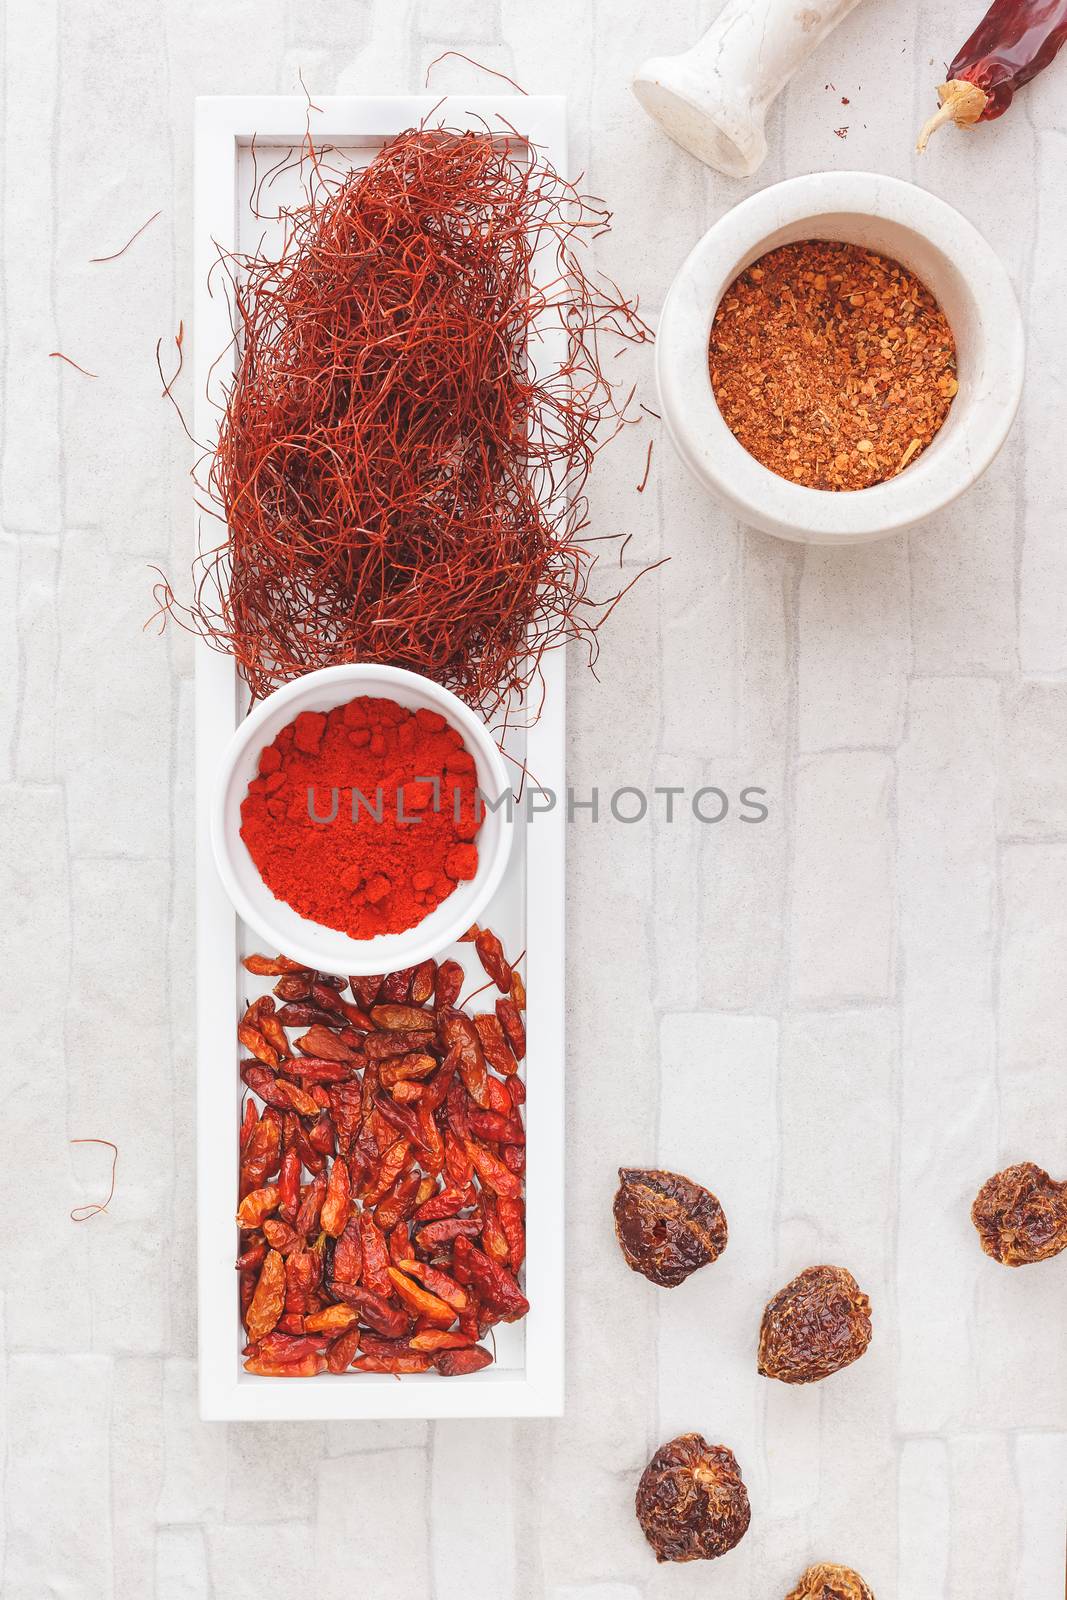 Selection of chili peppers, including: chili powder; crushed red pepper; chili peppers,chili threads and dried chili habanero. Overhead view, blank space. Natural light